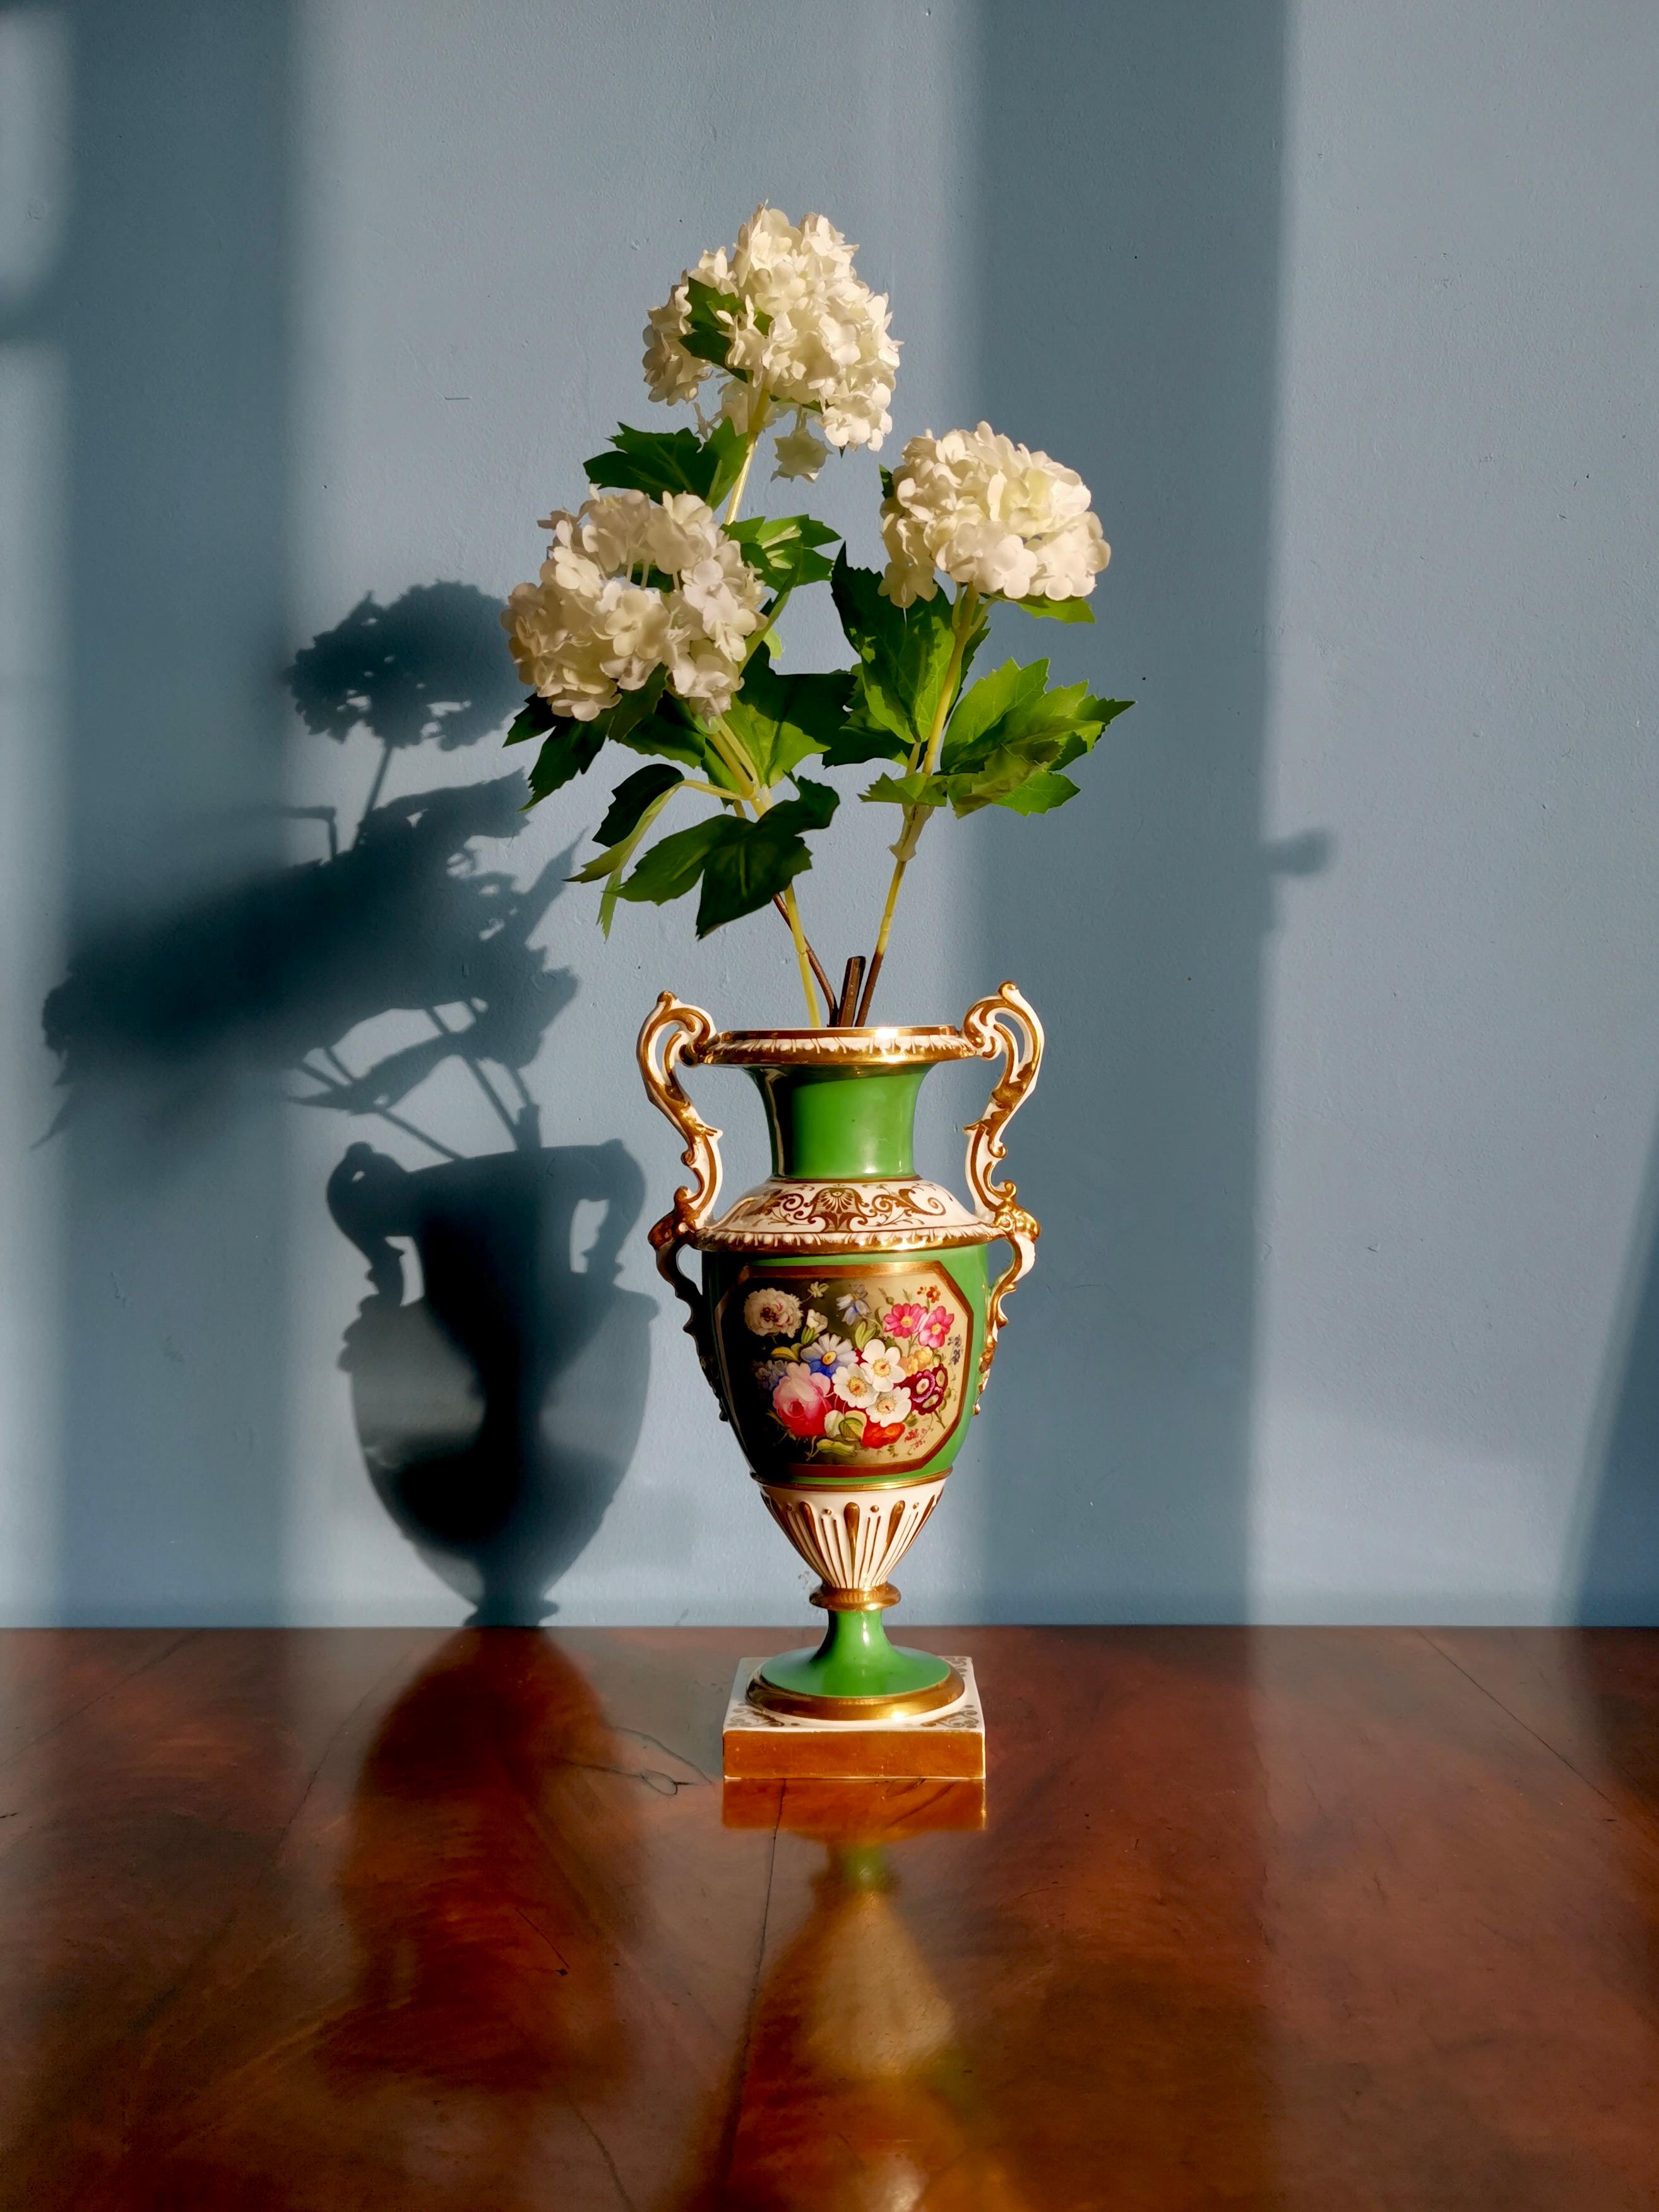 This is a stunning vase made by Minton between 1830 and 1835. The vase has a bright emerald green ground with a beautiful floral reserve in the front, and charmingly shaped gilt handles with rams heads.

Minton was one of the pioneers of English